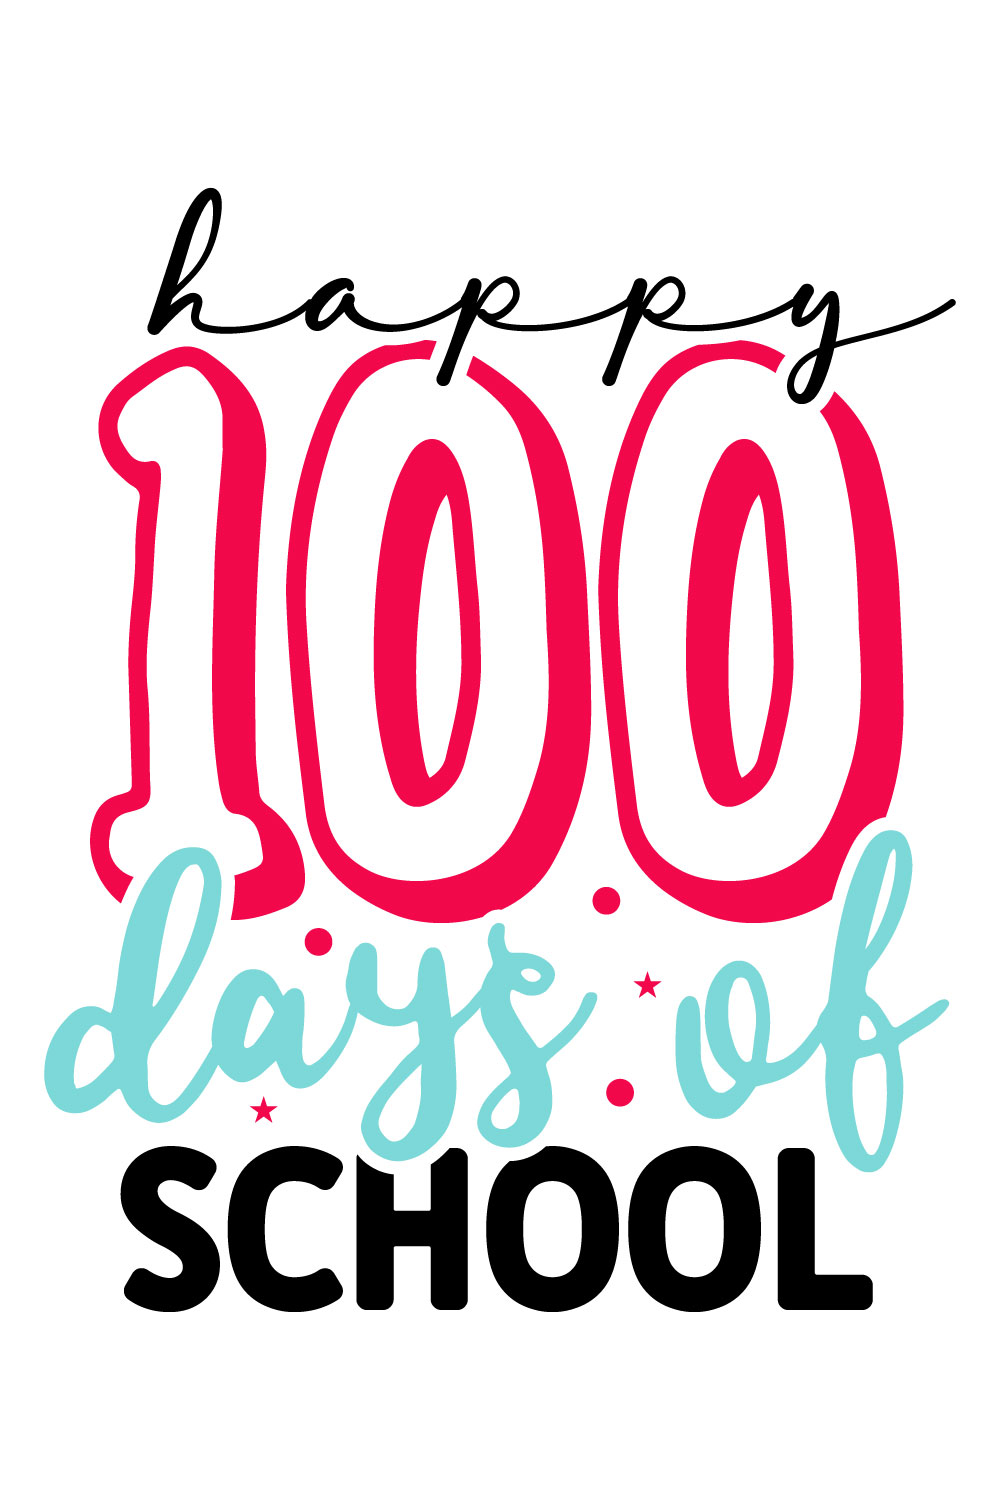 Image for prints with amazing inscription Happy 100 Days Of School